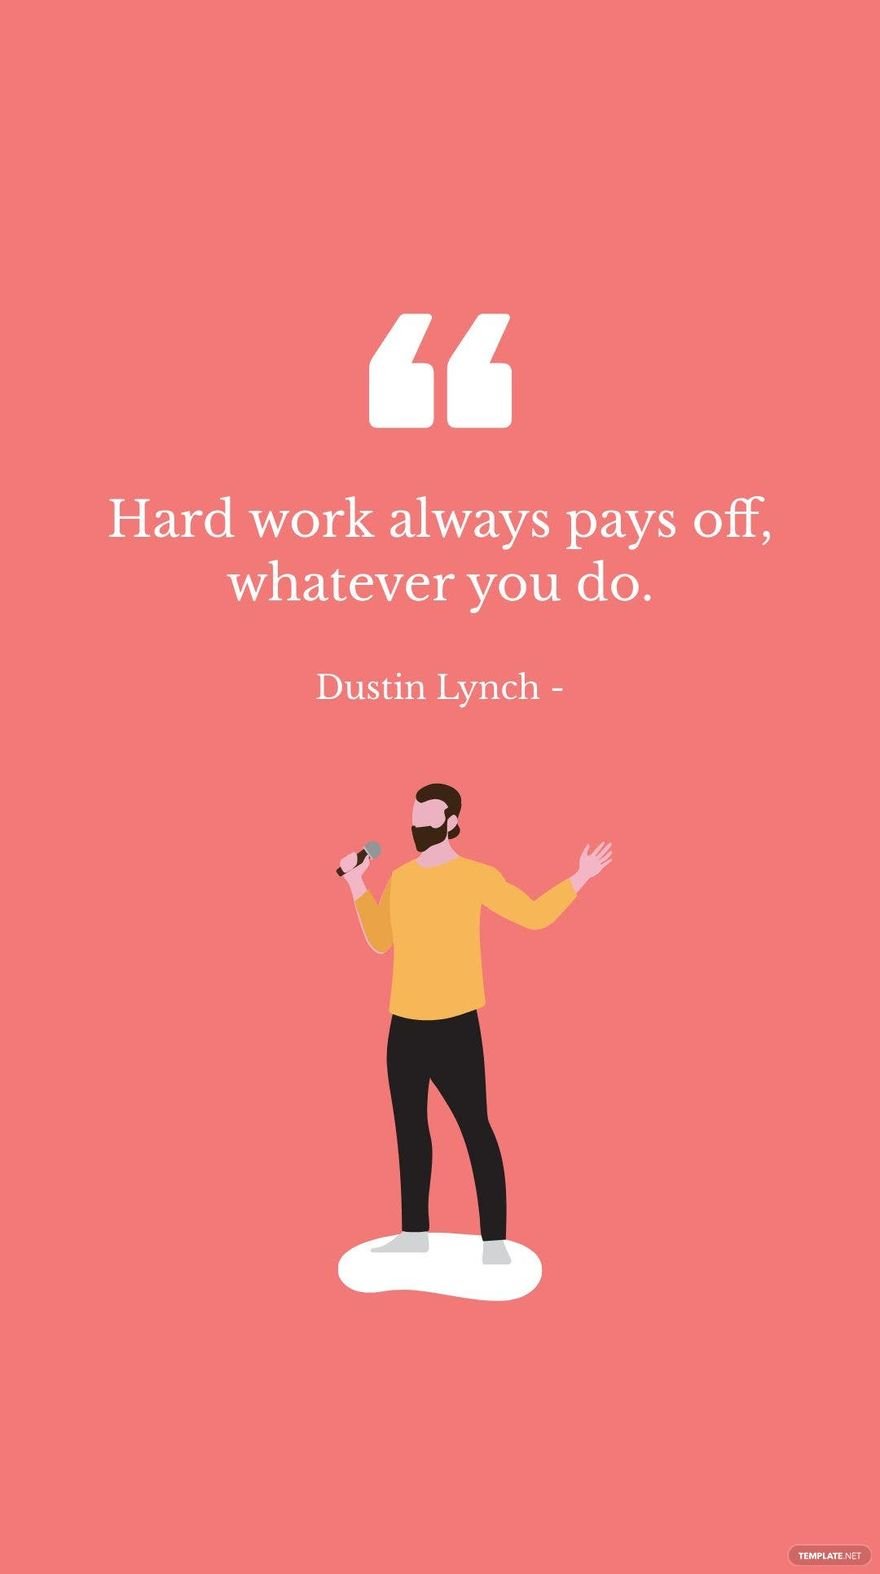 Free Dustin Lynch - Hard work always pays off, whatever you do. in JPG